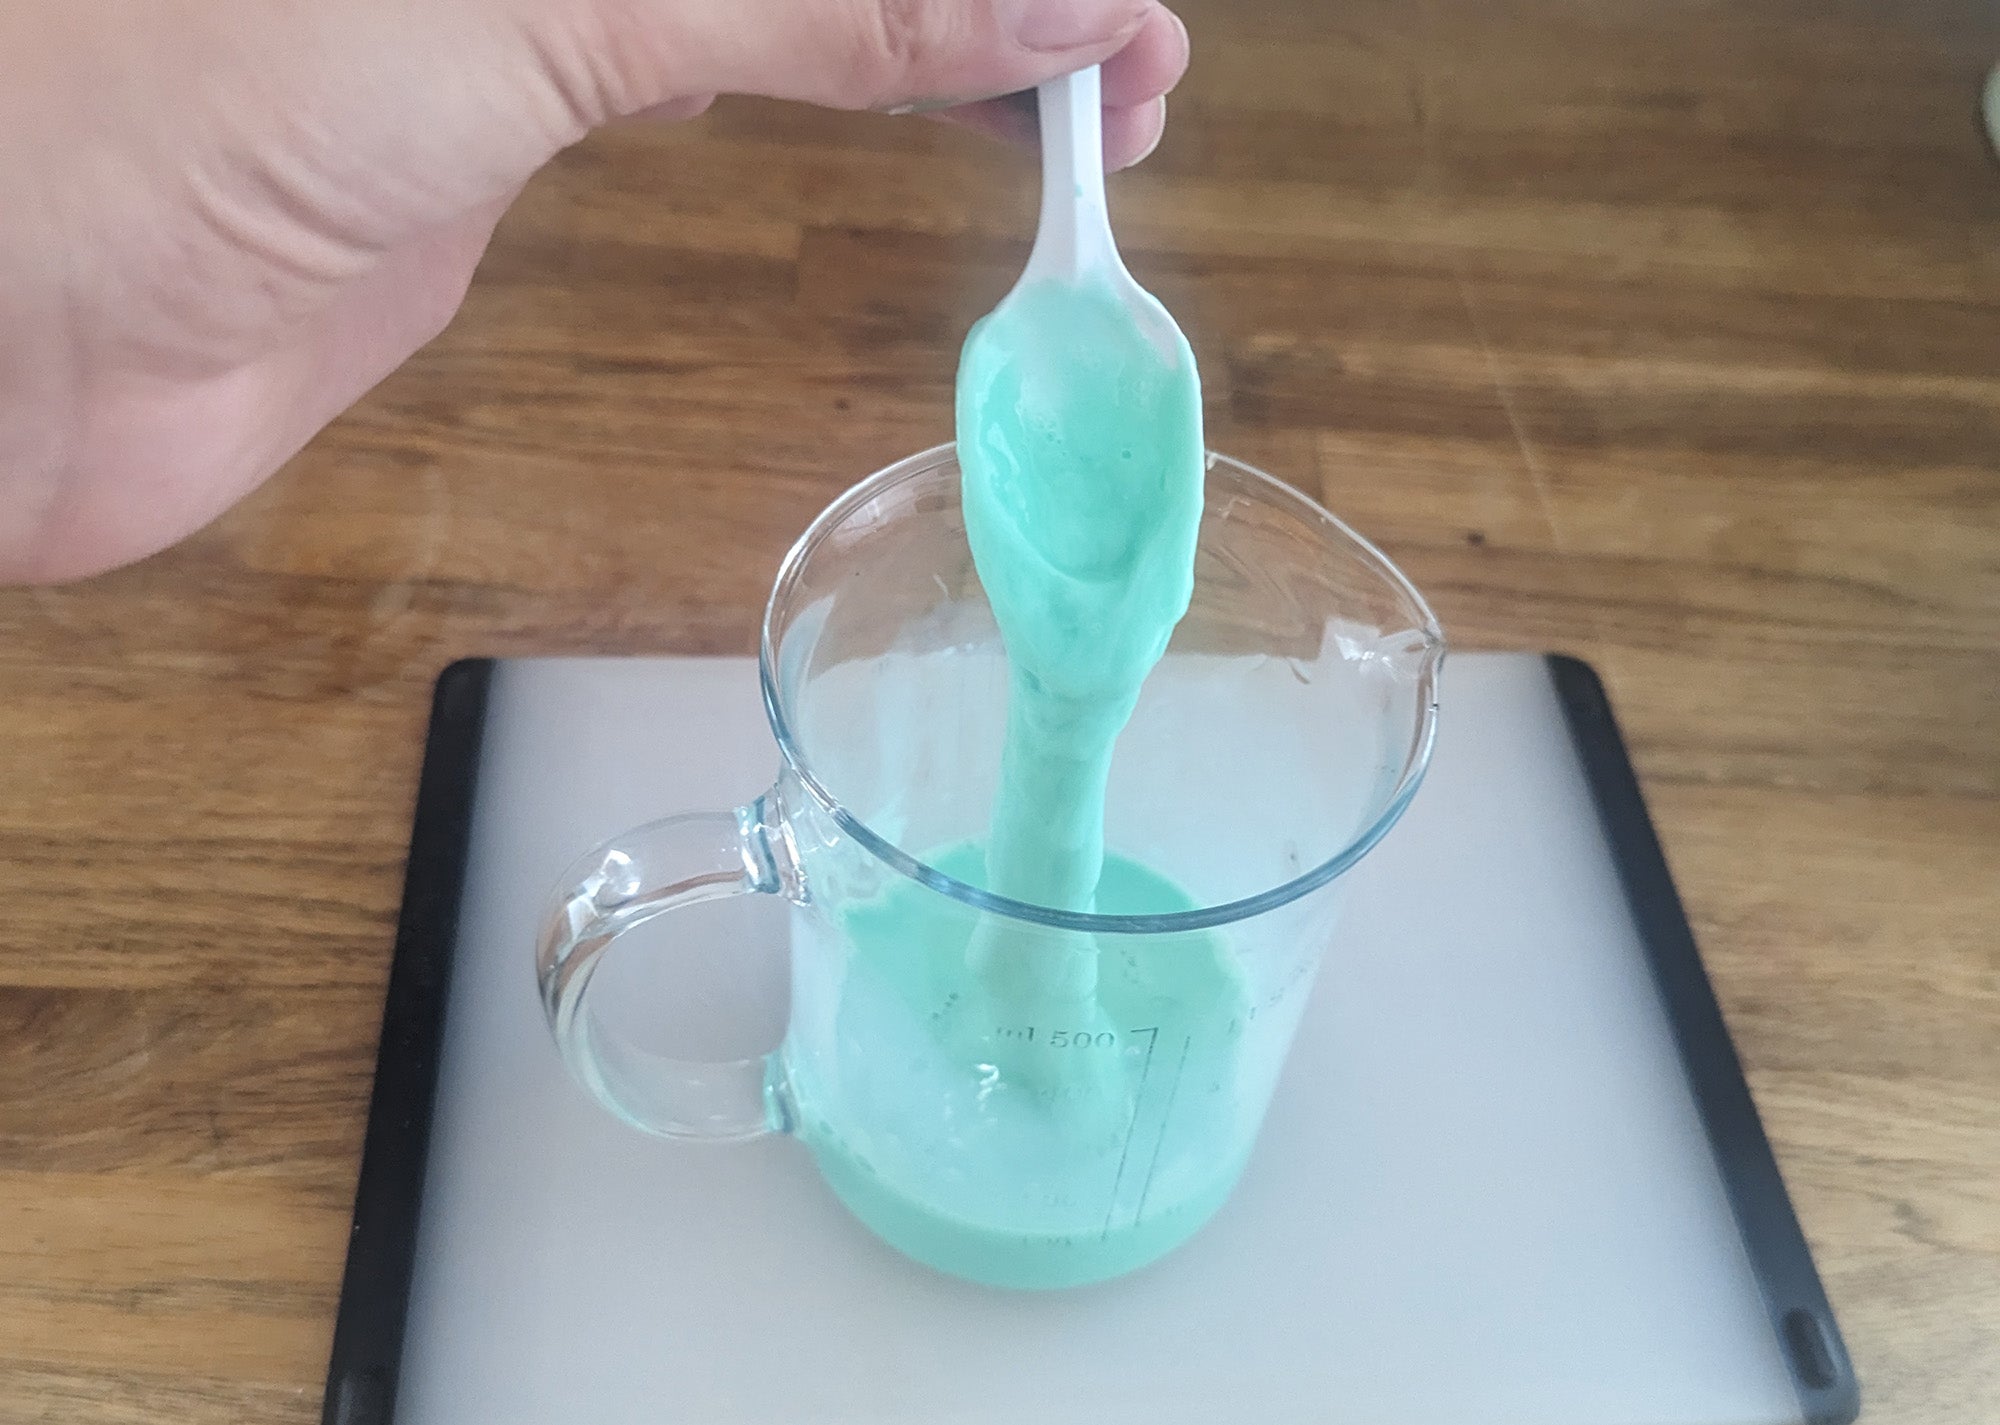 To make your own slime you'll need to combine borax and liquid glue.